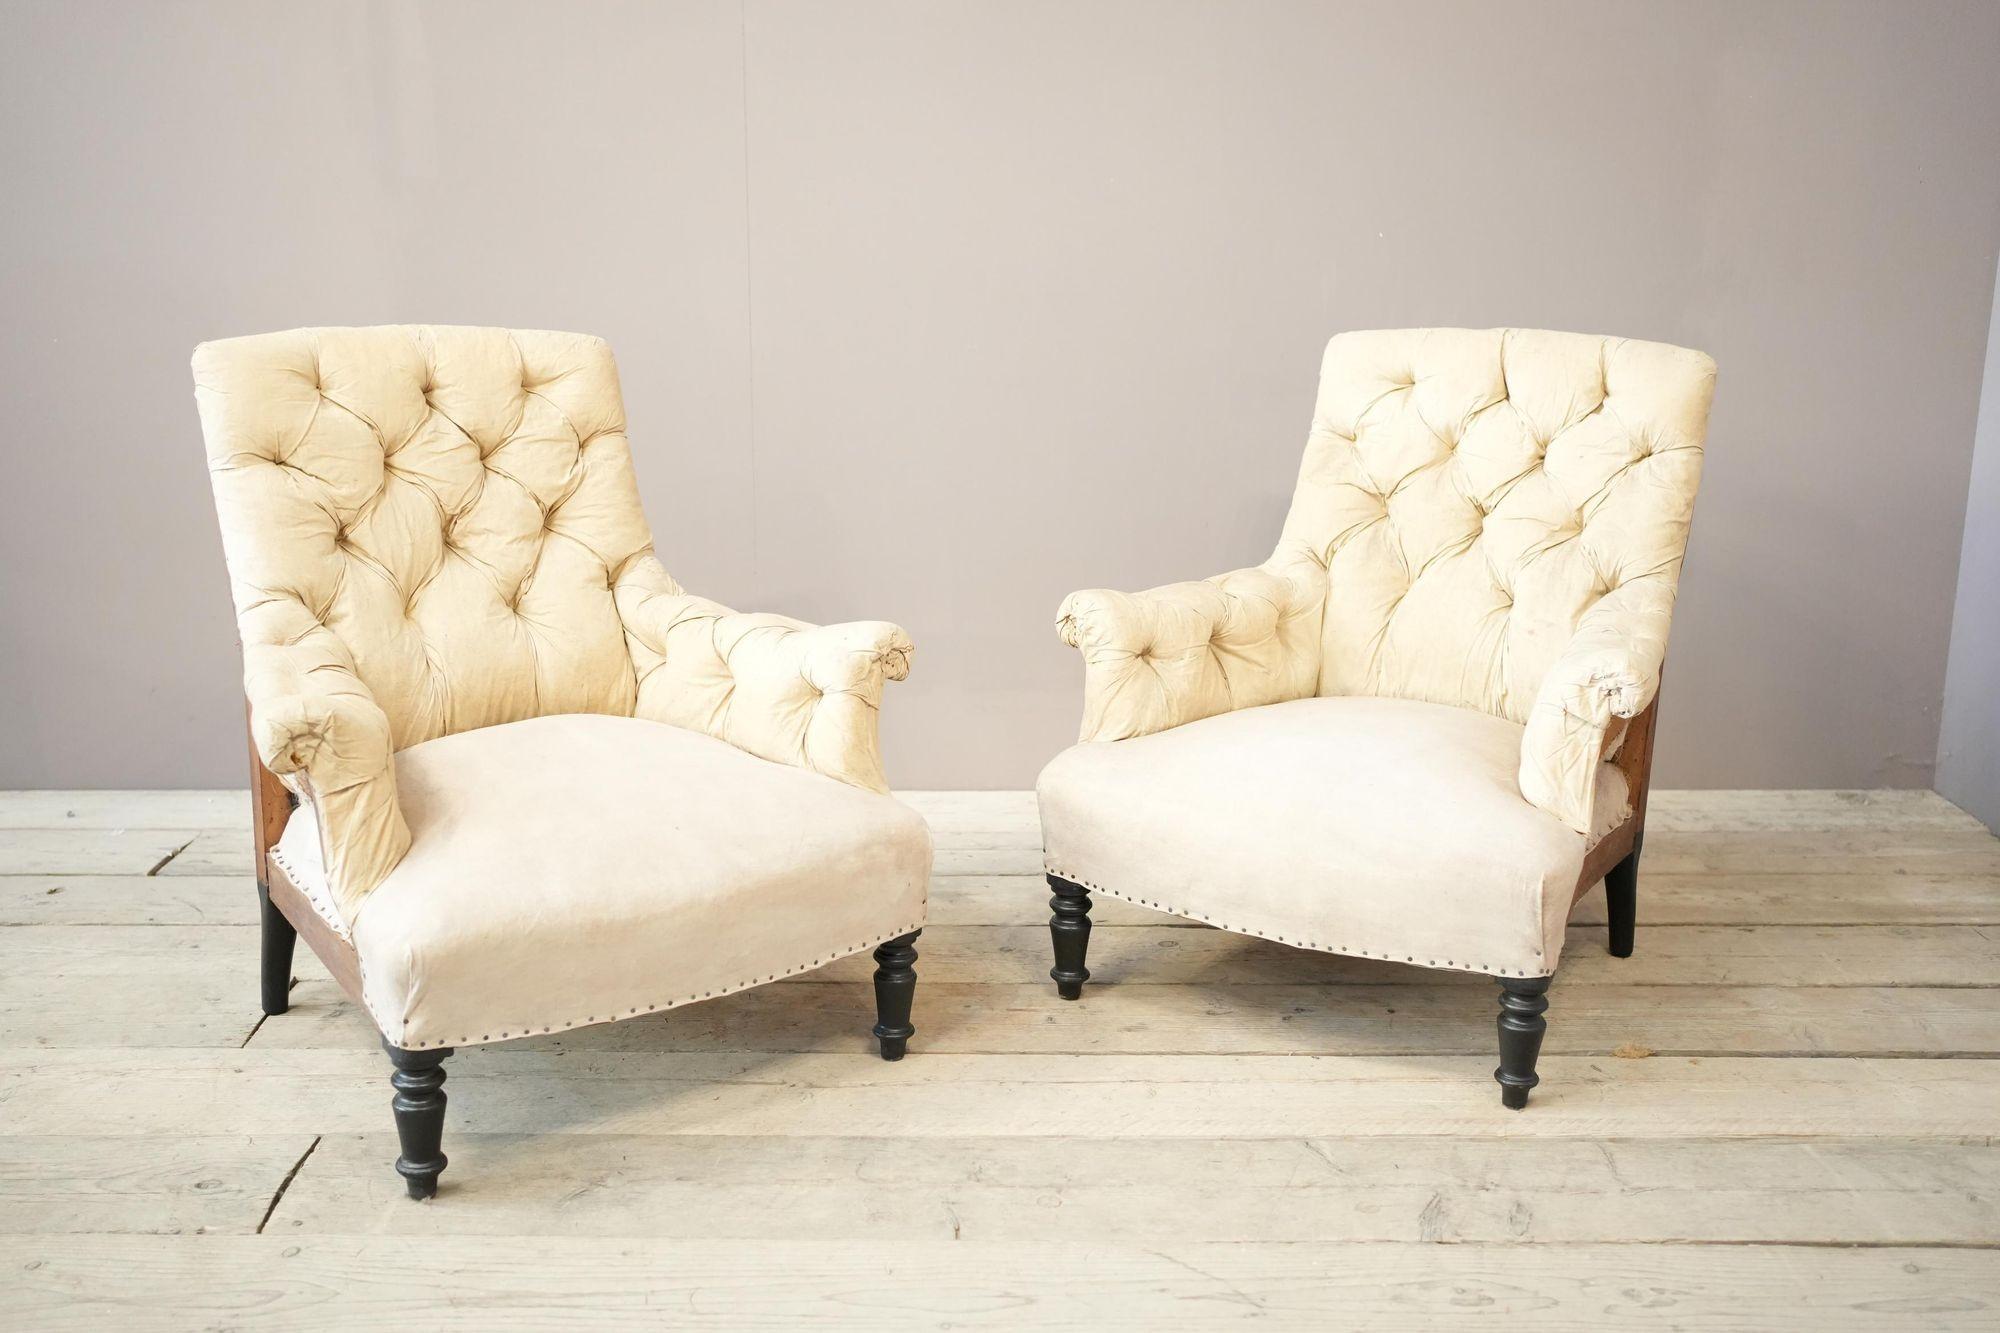 If you would like these chairs upholstered please click yes in the upholstery drop down menu. These would require 10 metres of material (5m per chair). You can supply your own or please get in touch and we will send you the list of fabric companies